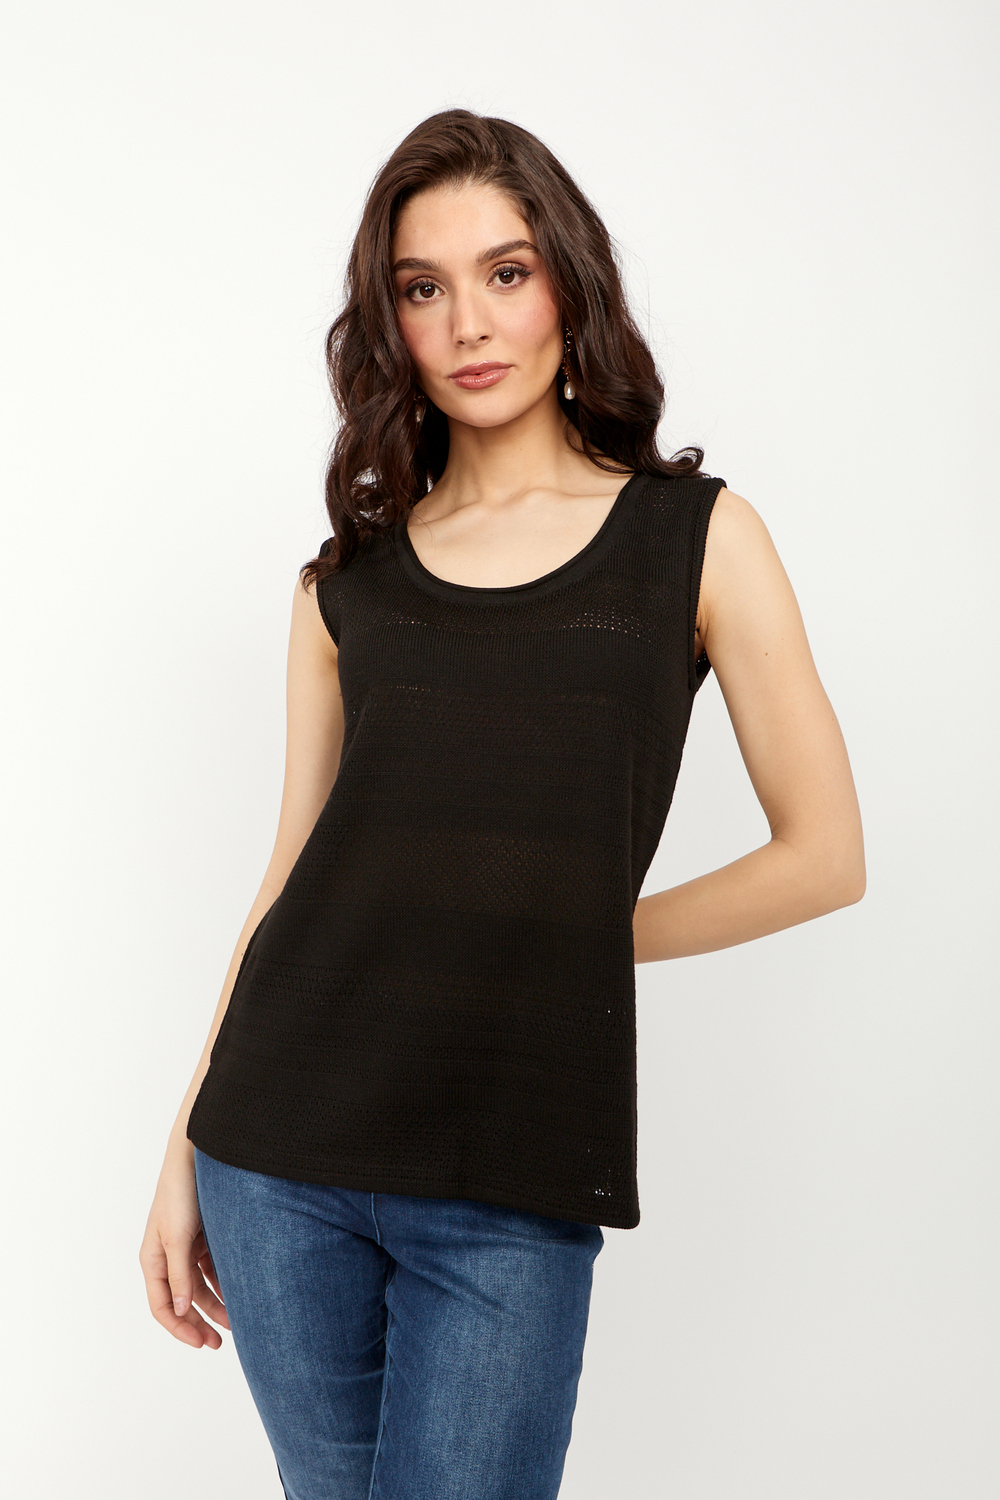 Round Neck Casual Top Style 24180. Black